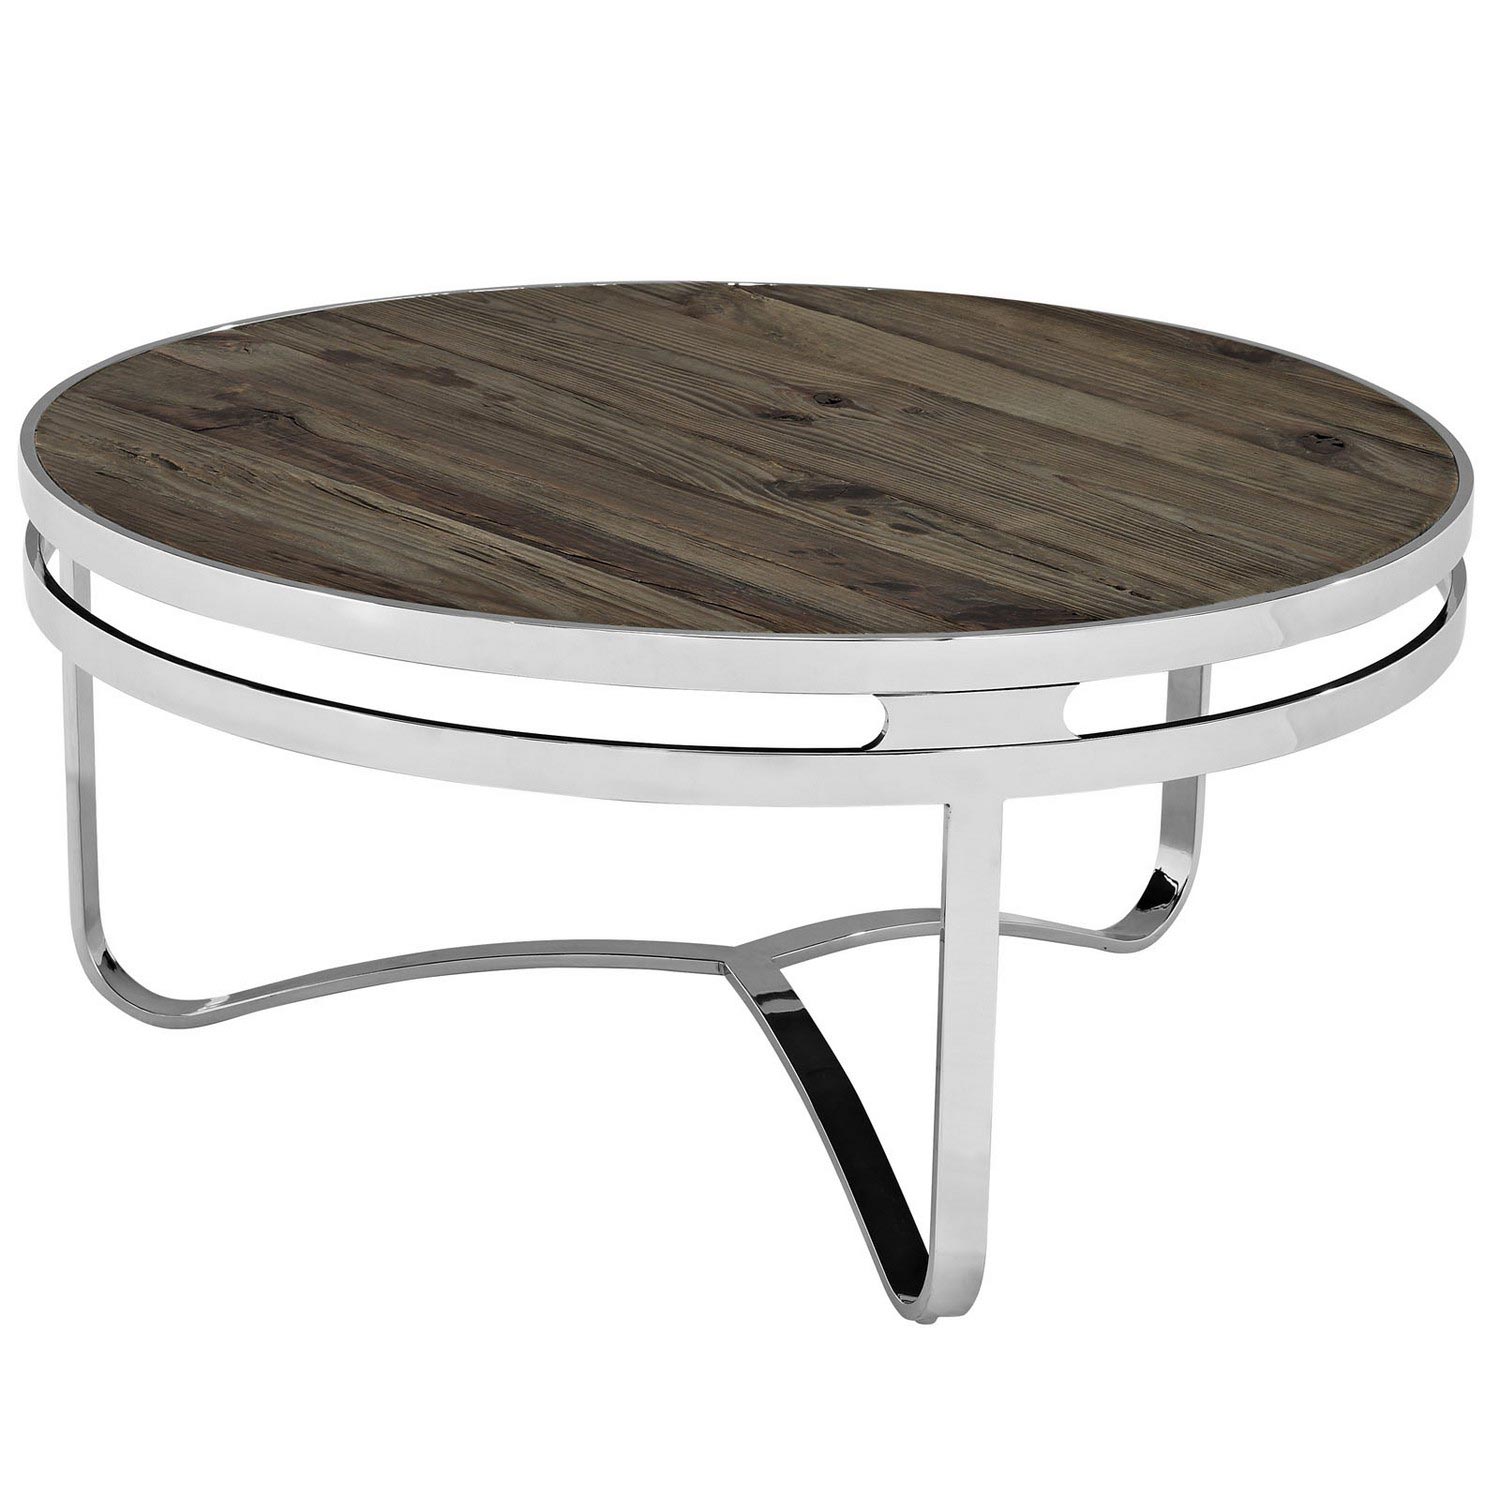 Modway Provision Wood Top Coffee Table - Brown